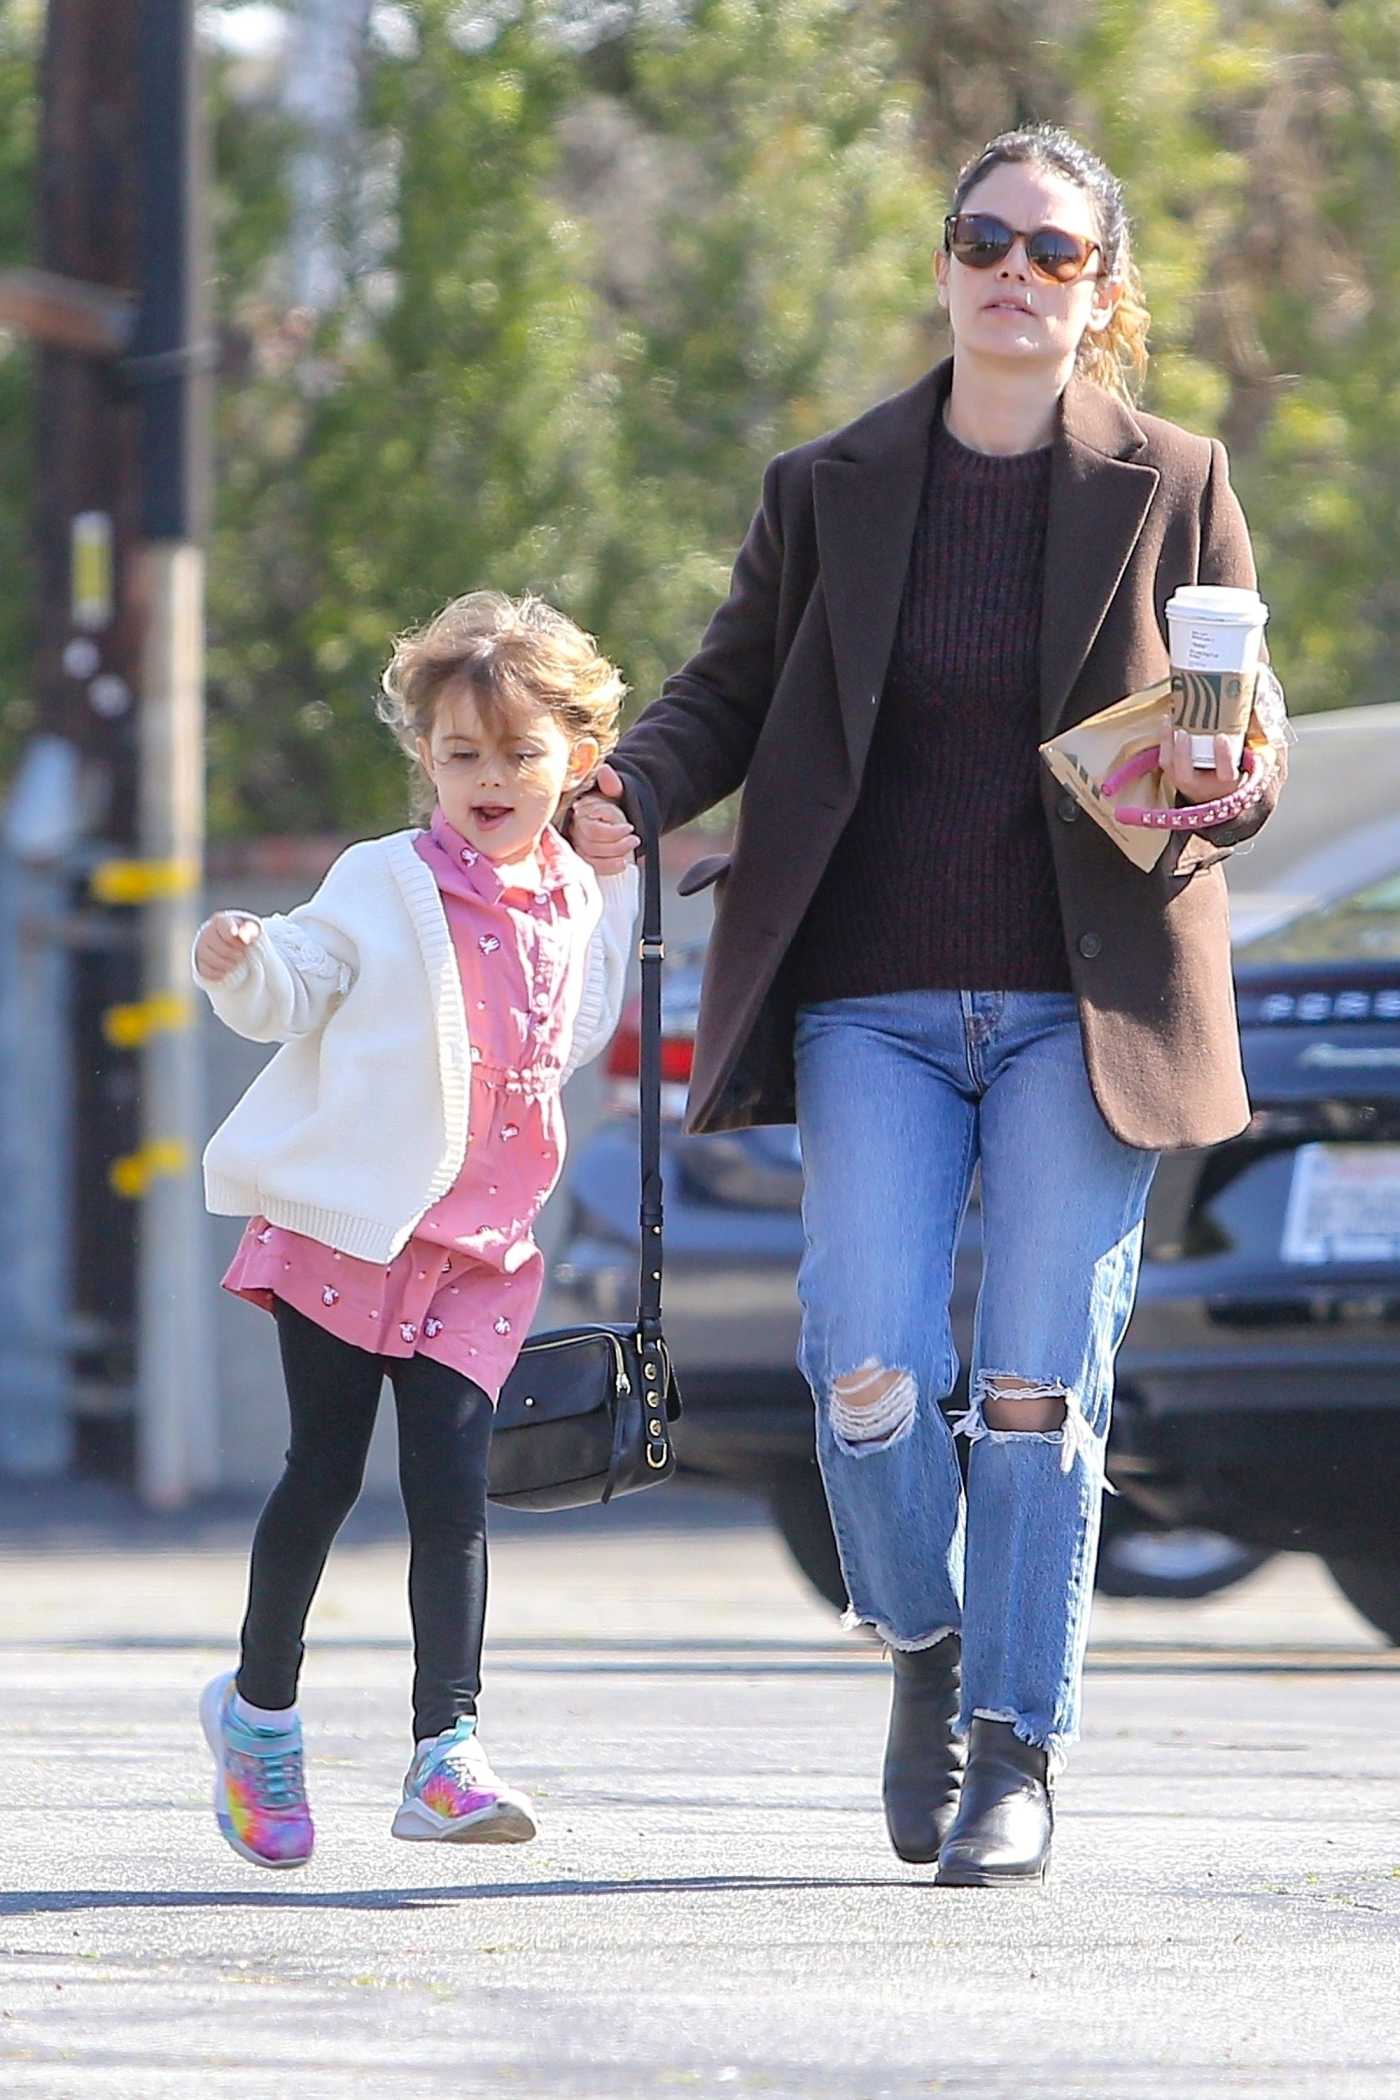 Rachel Bilson In A Blue Ripped Jeans Was Seen Out With Her Daughter In Pasadena 02 14 2020 1 